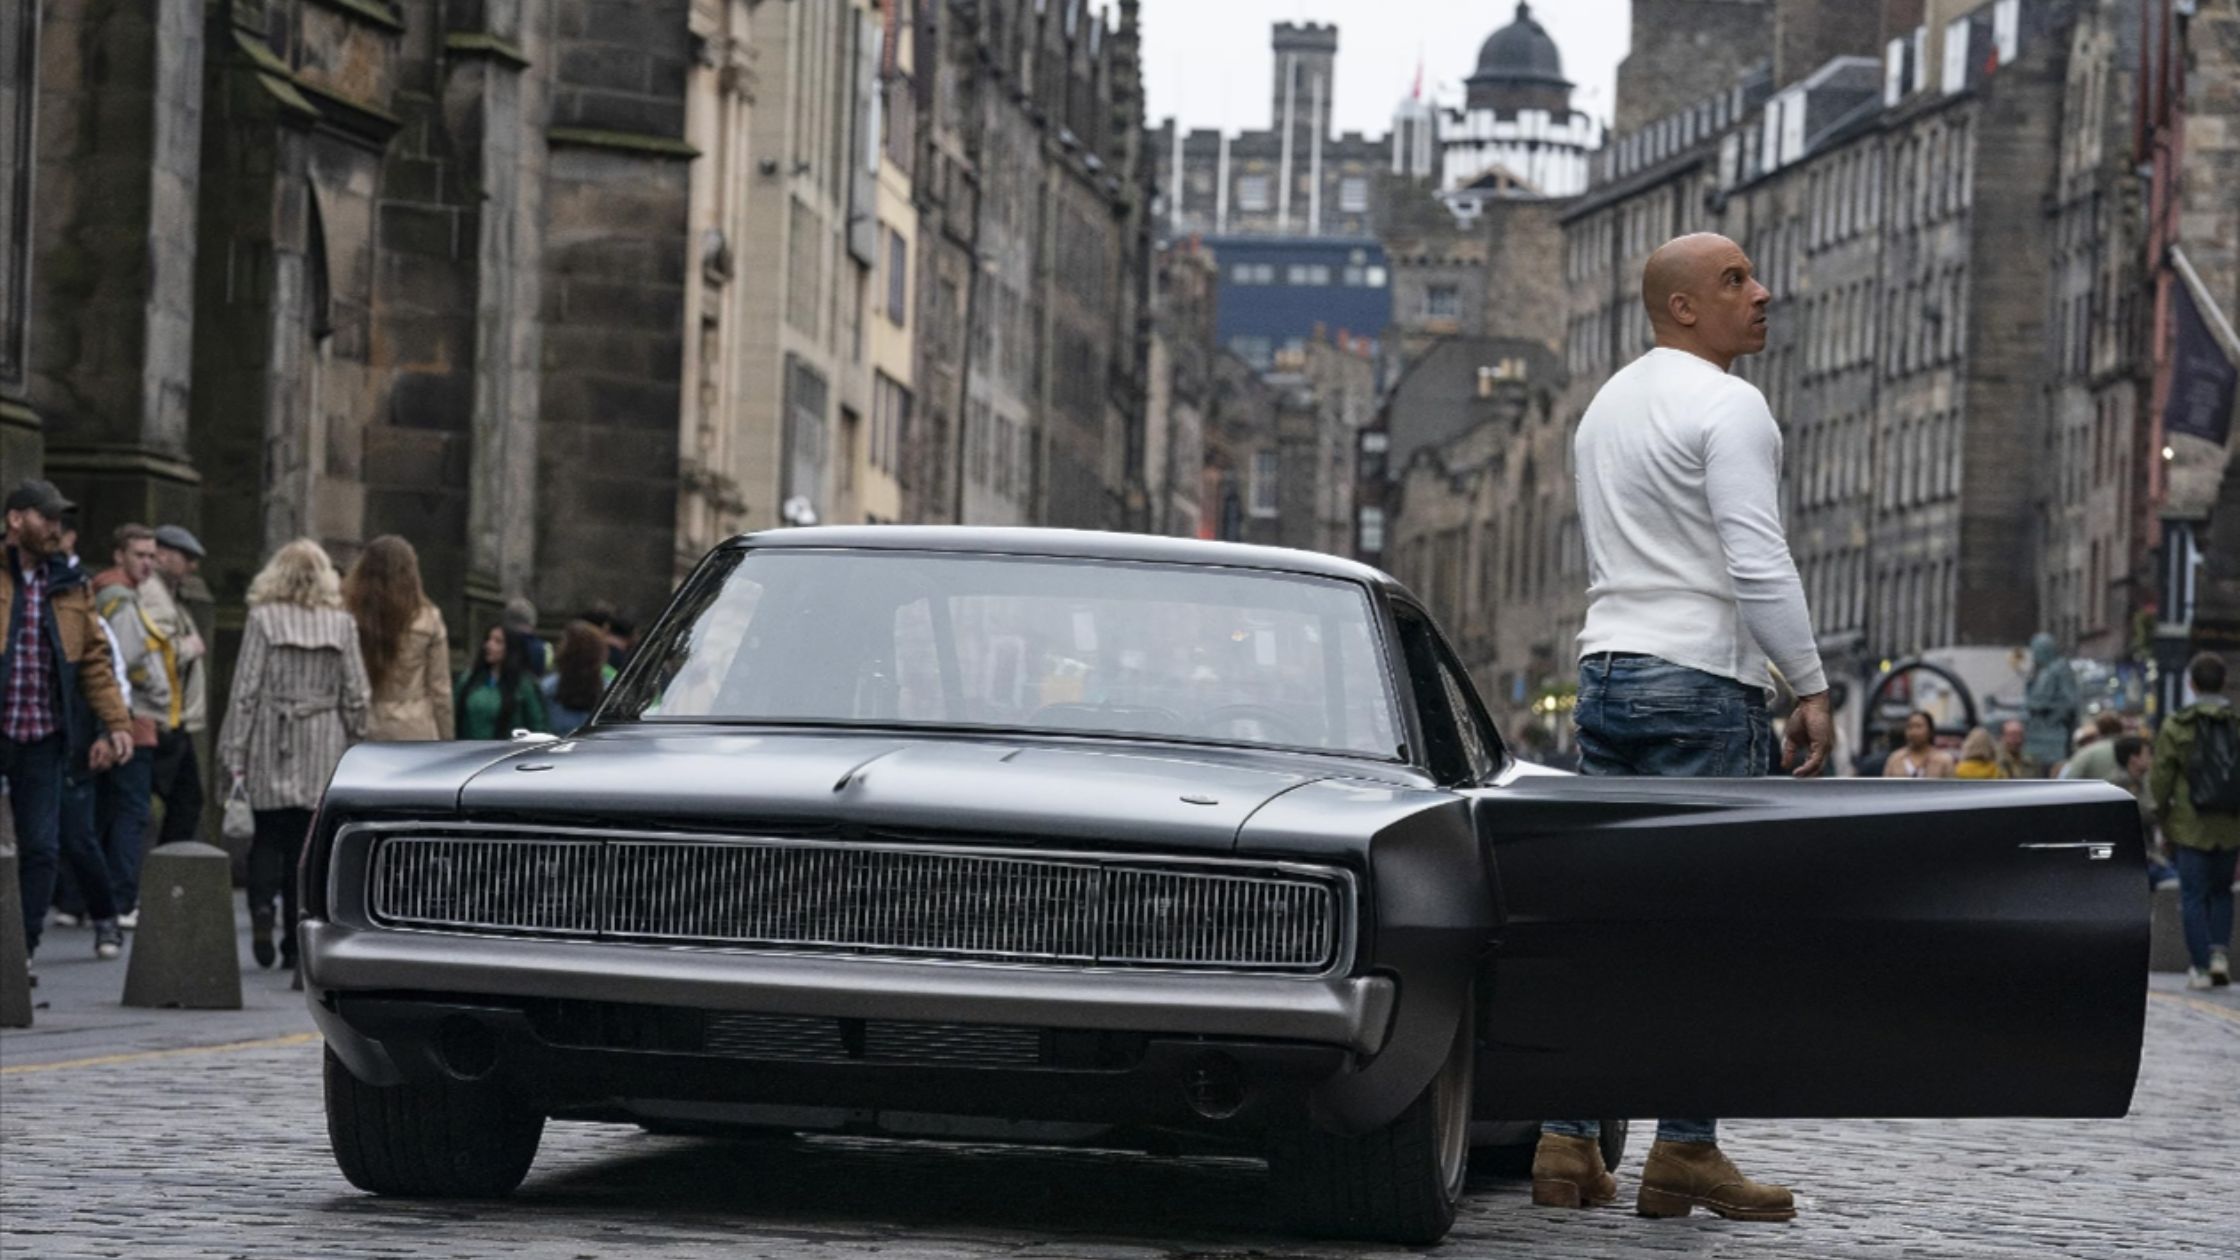 A scene from Fast and Furious Franchise. Vin Diesel walking out of his car.